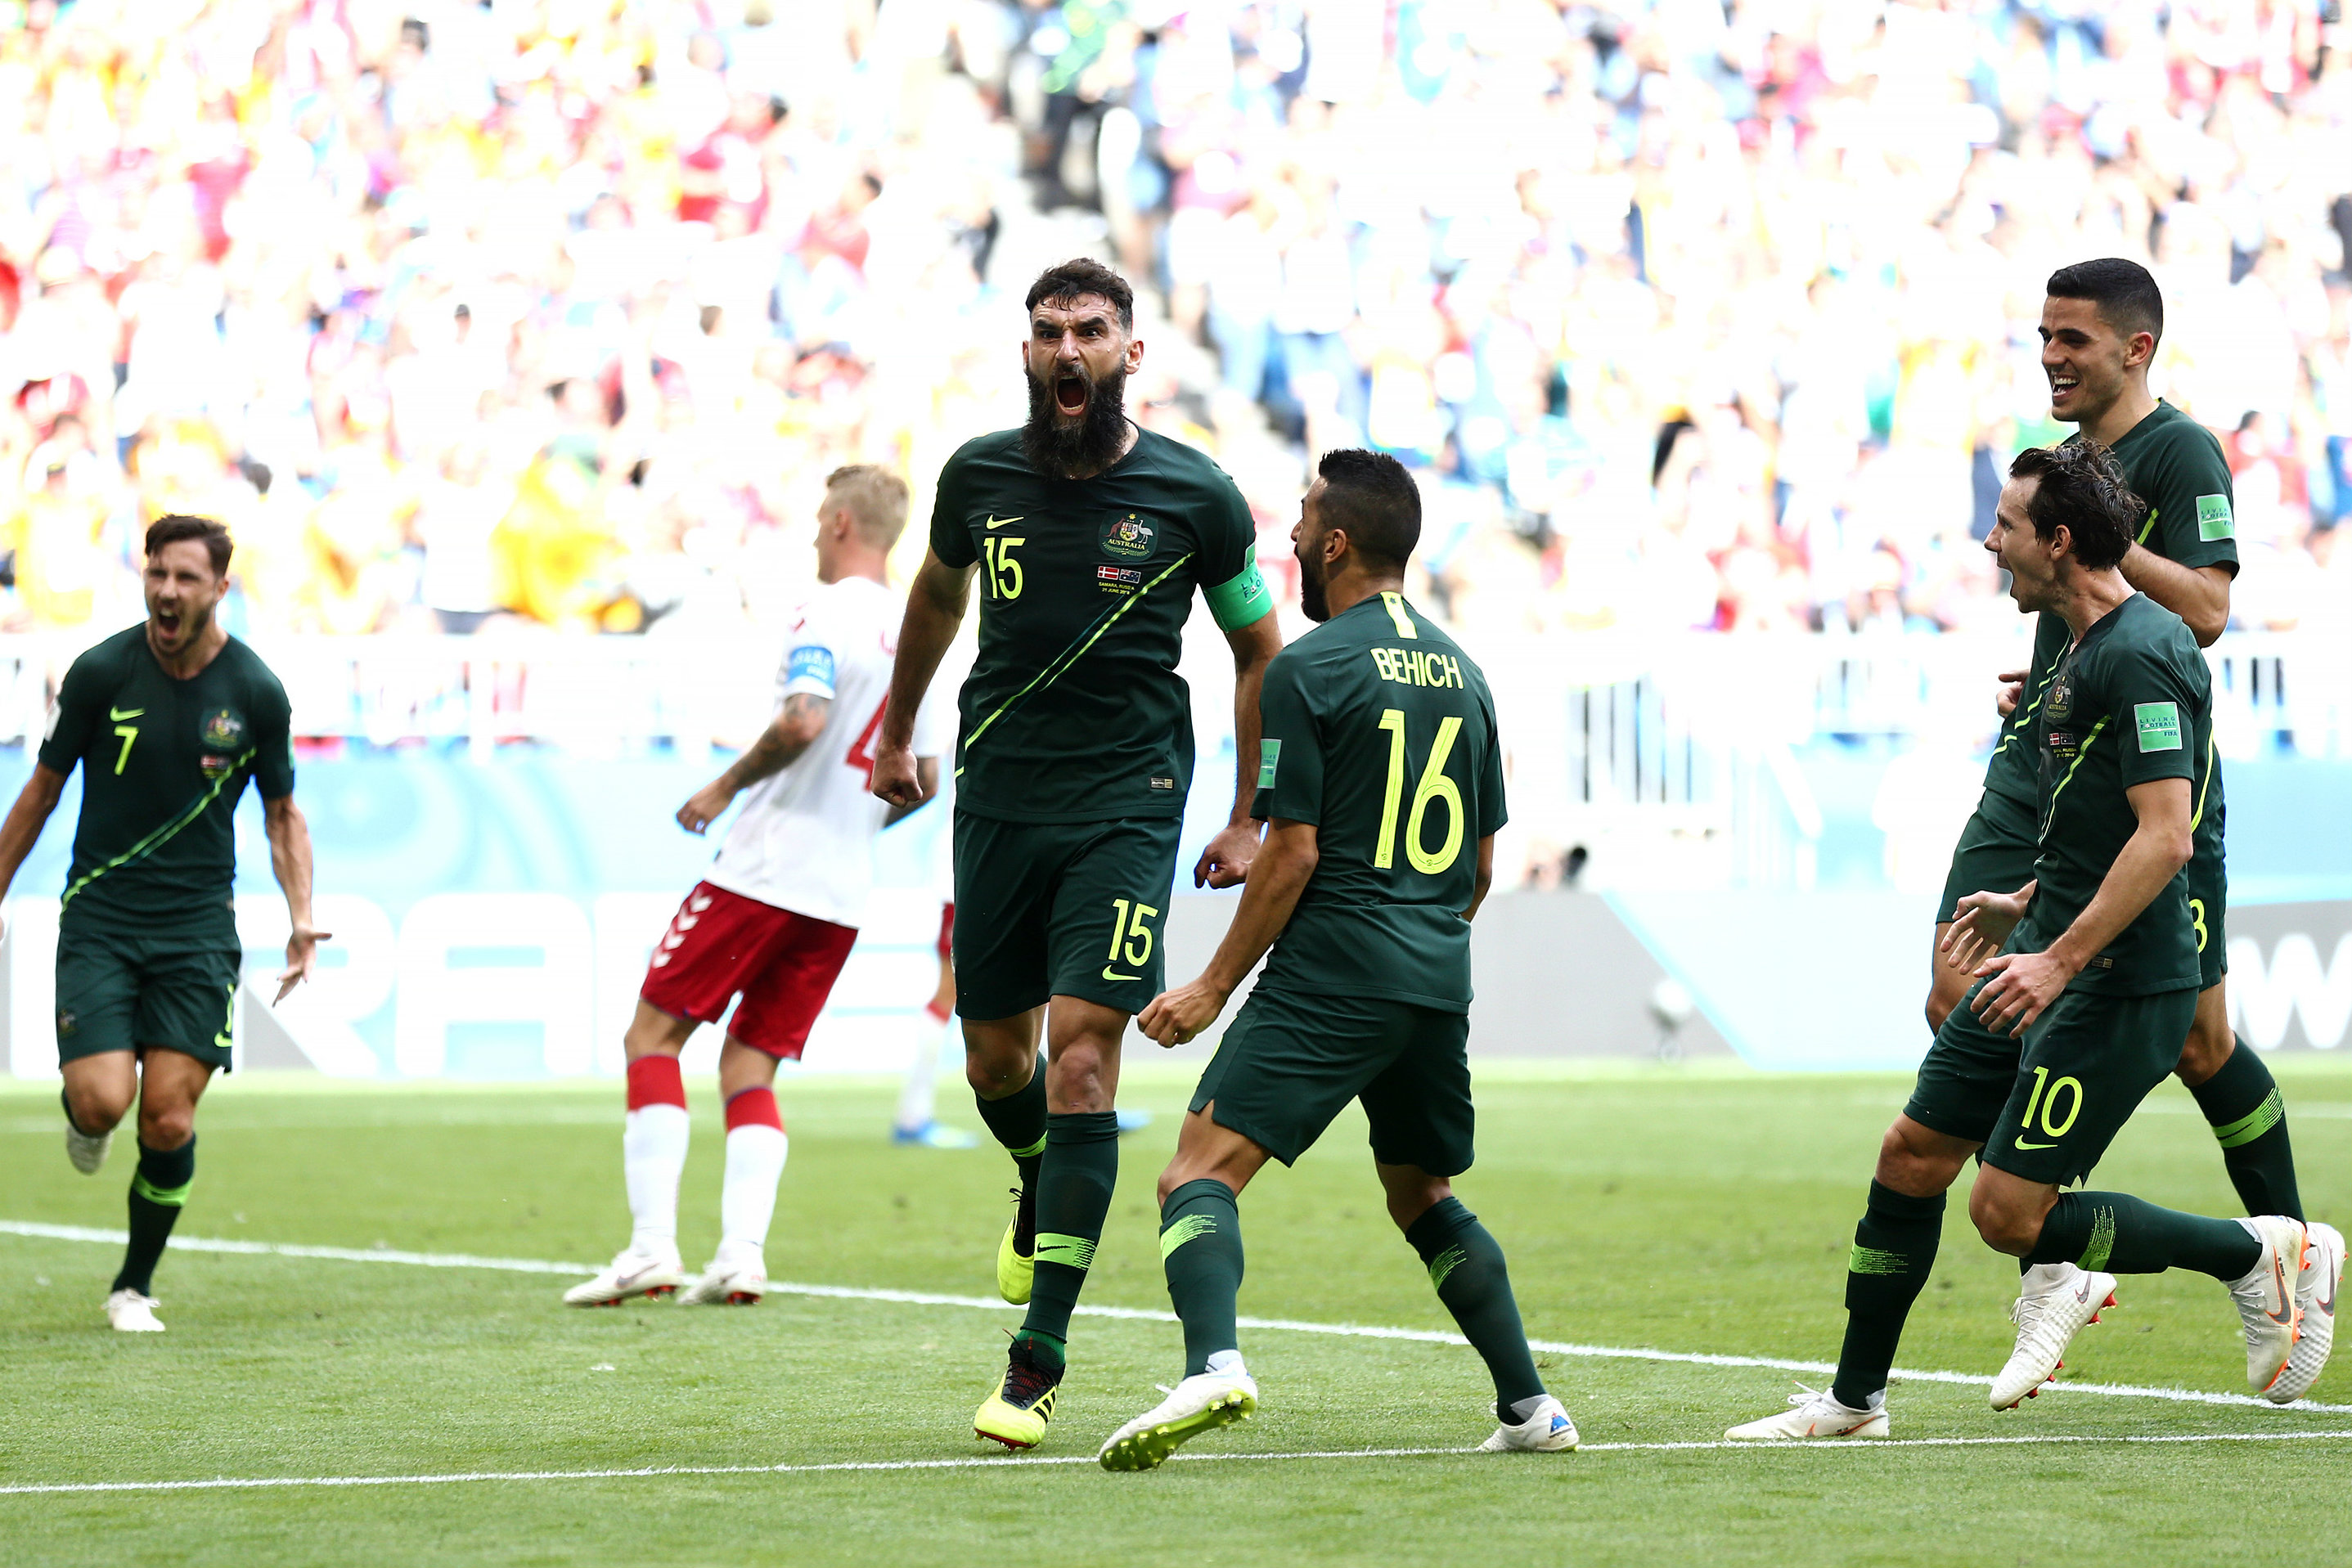 Jedinak found the net again in the following game, a 1-1 draw against Denmark.